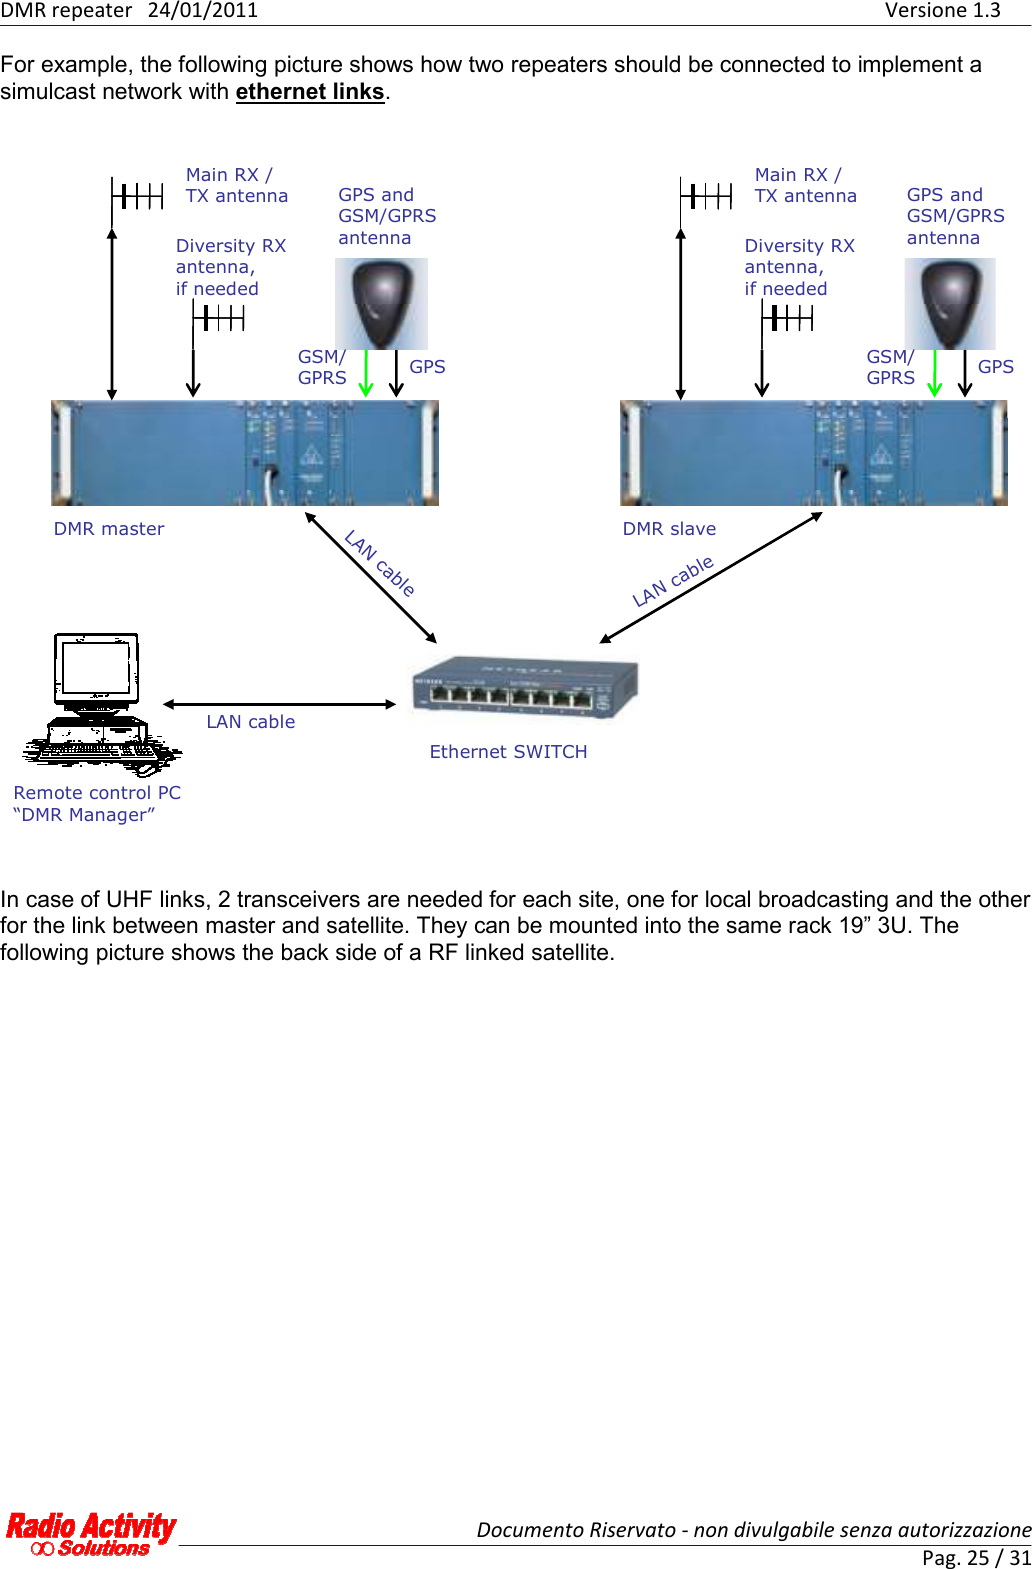 DMR repeater  24/01/2011                  Versione 1.3   Documento Riservato - non divulgabile senza autorizzazione Pag. 25 / 31 For example, the following picture shows how two repeaters should be connected to implement a simulcast network with ethernet links.   GPS and GSM/GPRS antennaEthernet SWITCHLAN cableLAN cableLAN cableRemote control PC “DMR Manager”GPSGSM/GPRSDMR masterDiversity RX antenna,    if neededMain RX / TX antenna GPS and GSM/GPRS antennaGPSGSM/GPRSDMR slaveDiversity RX antenna,    if neededMain RX / TX antenna   In case of UHF links, 2 transceivers are needed for each site, one for local broadcasting and the other for the link between master and satellite. They can be mounted into the same rack 19” 3U. The following picture shows the back side of a RF linked satellite. 